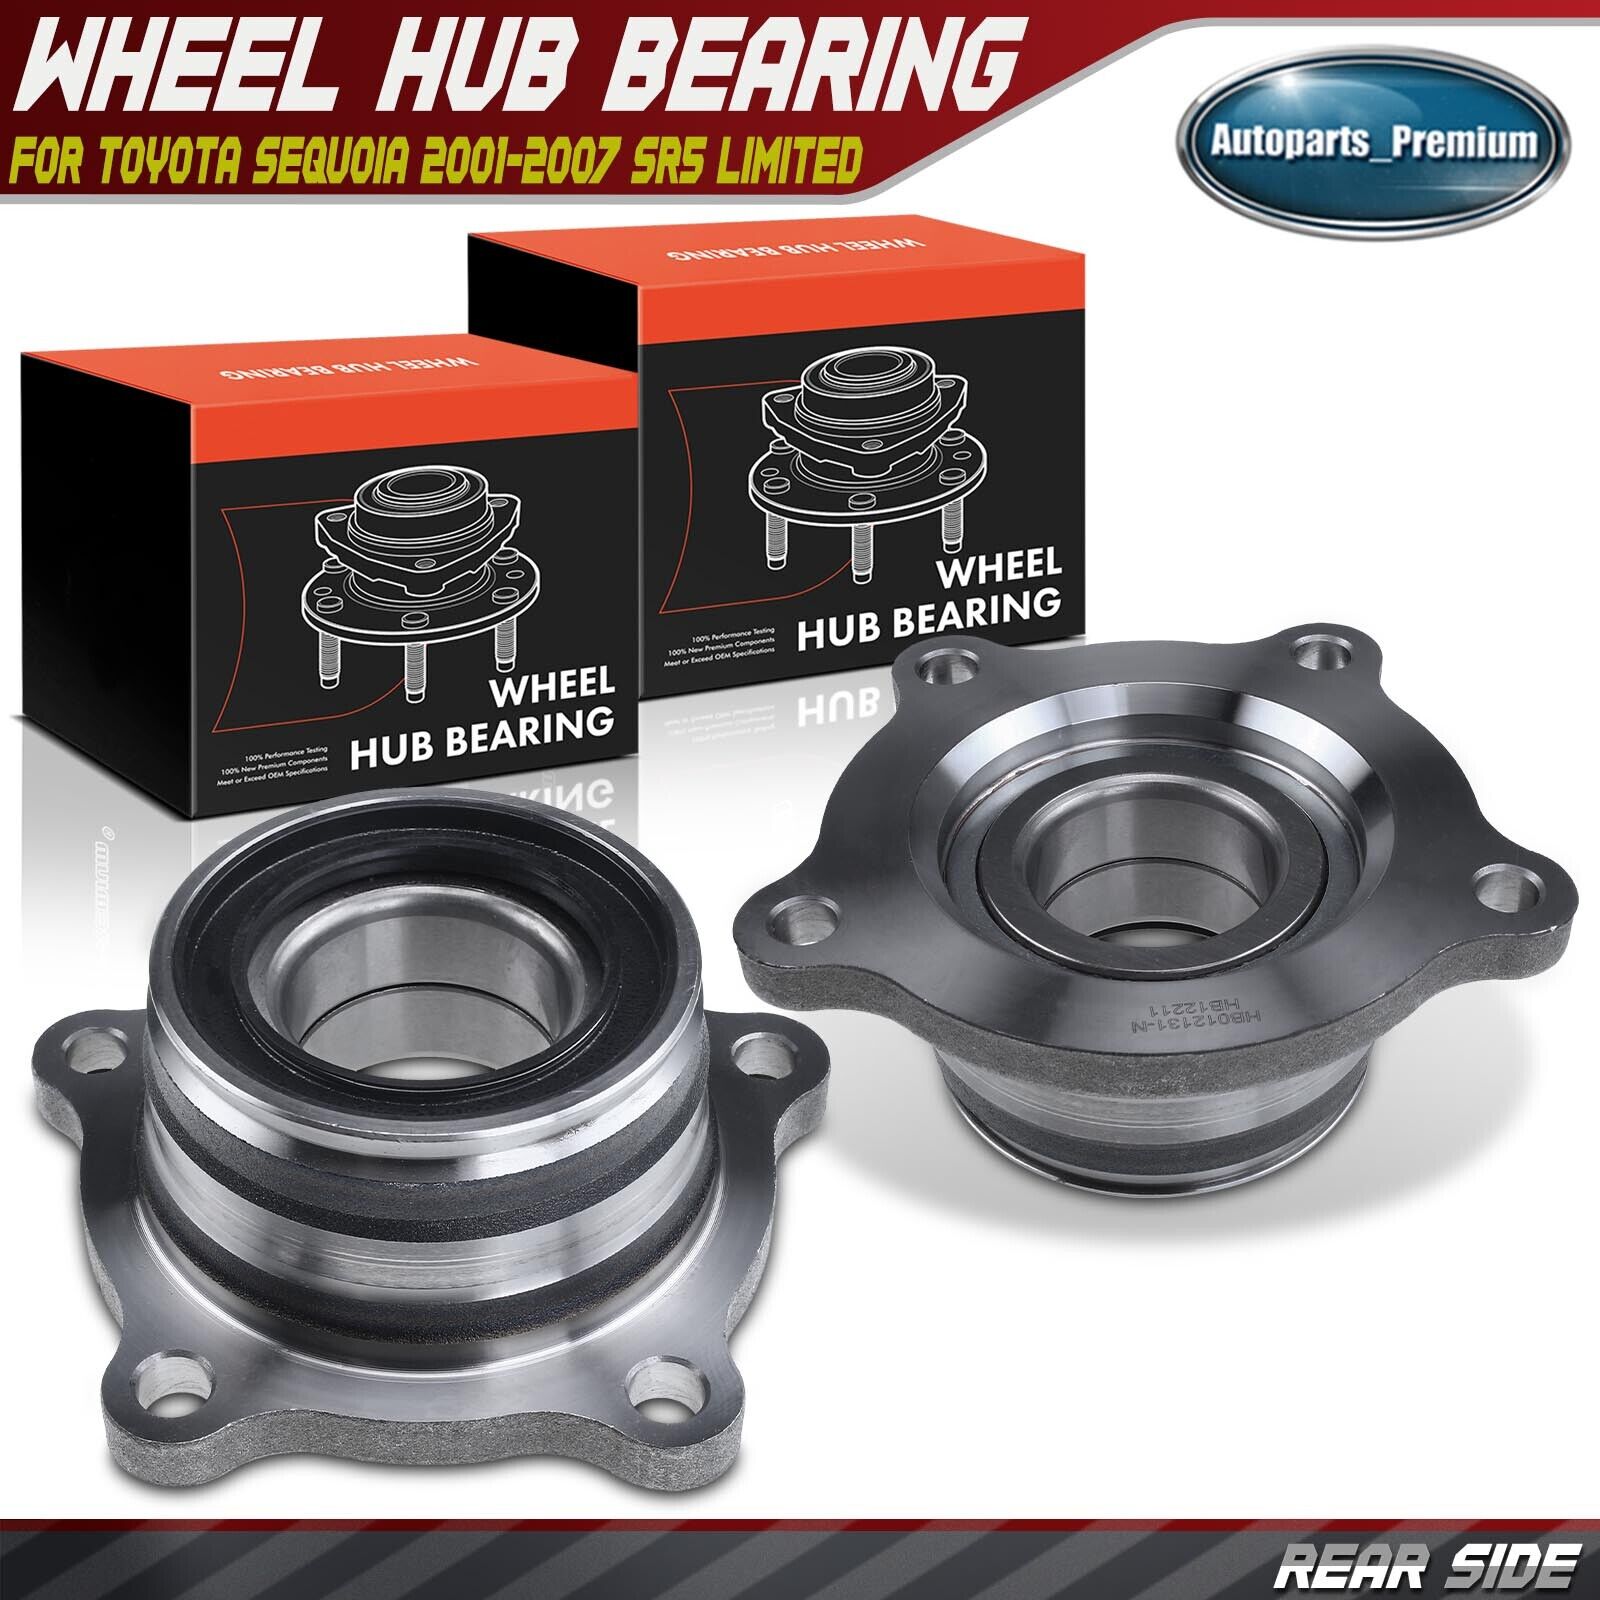 2x Rear Wheel Hub Bearing Assembly for Toyota Sequoia 2001 2002-2007 SR5 Limited